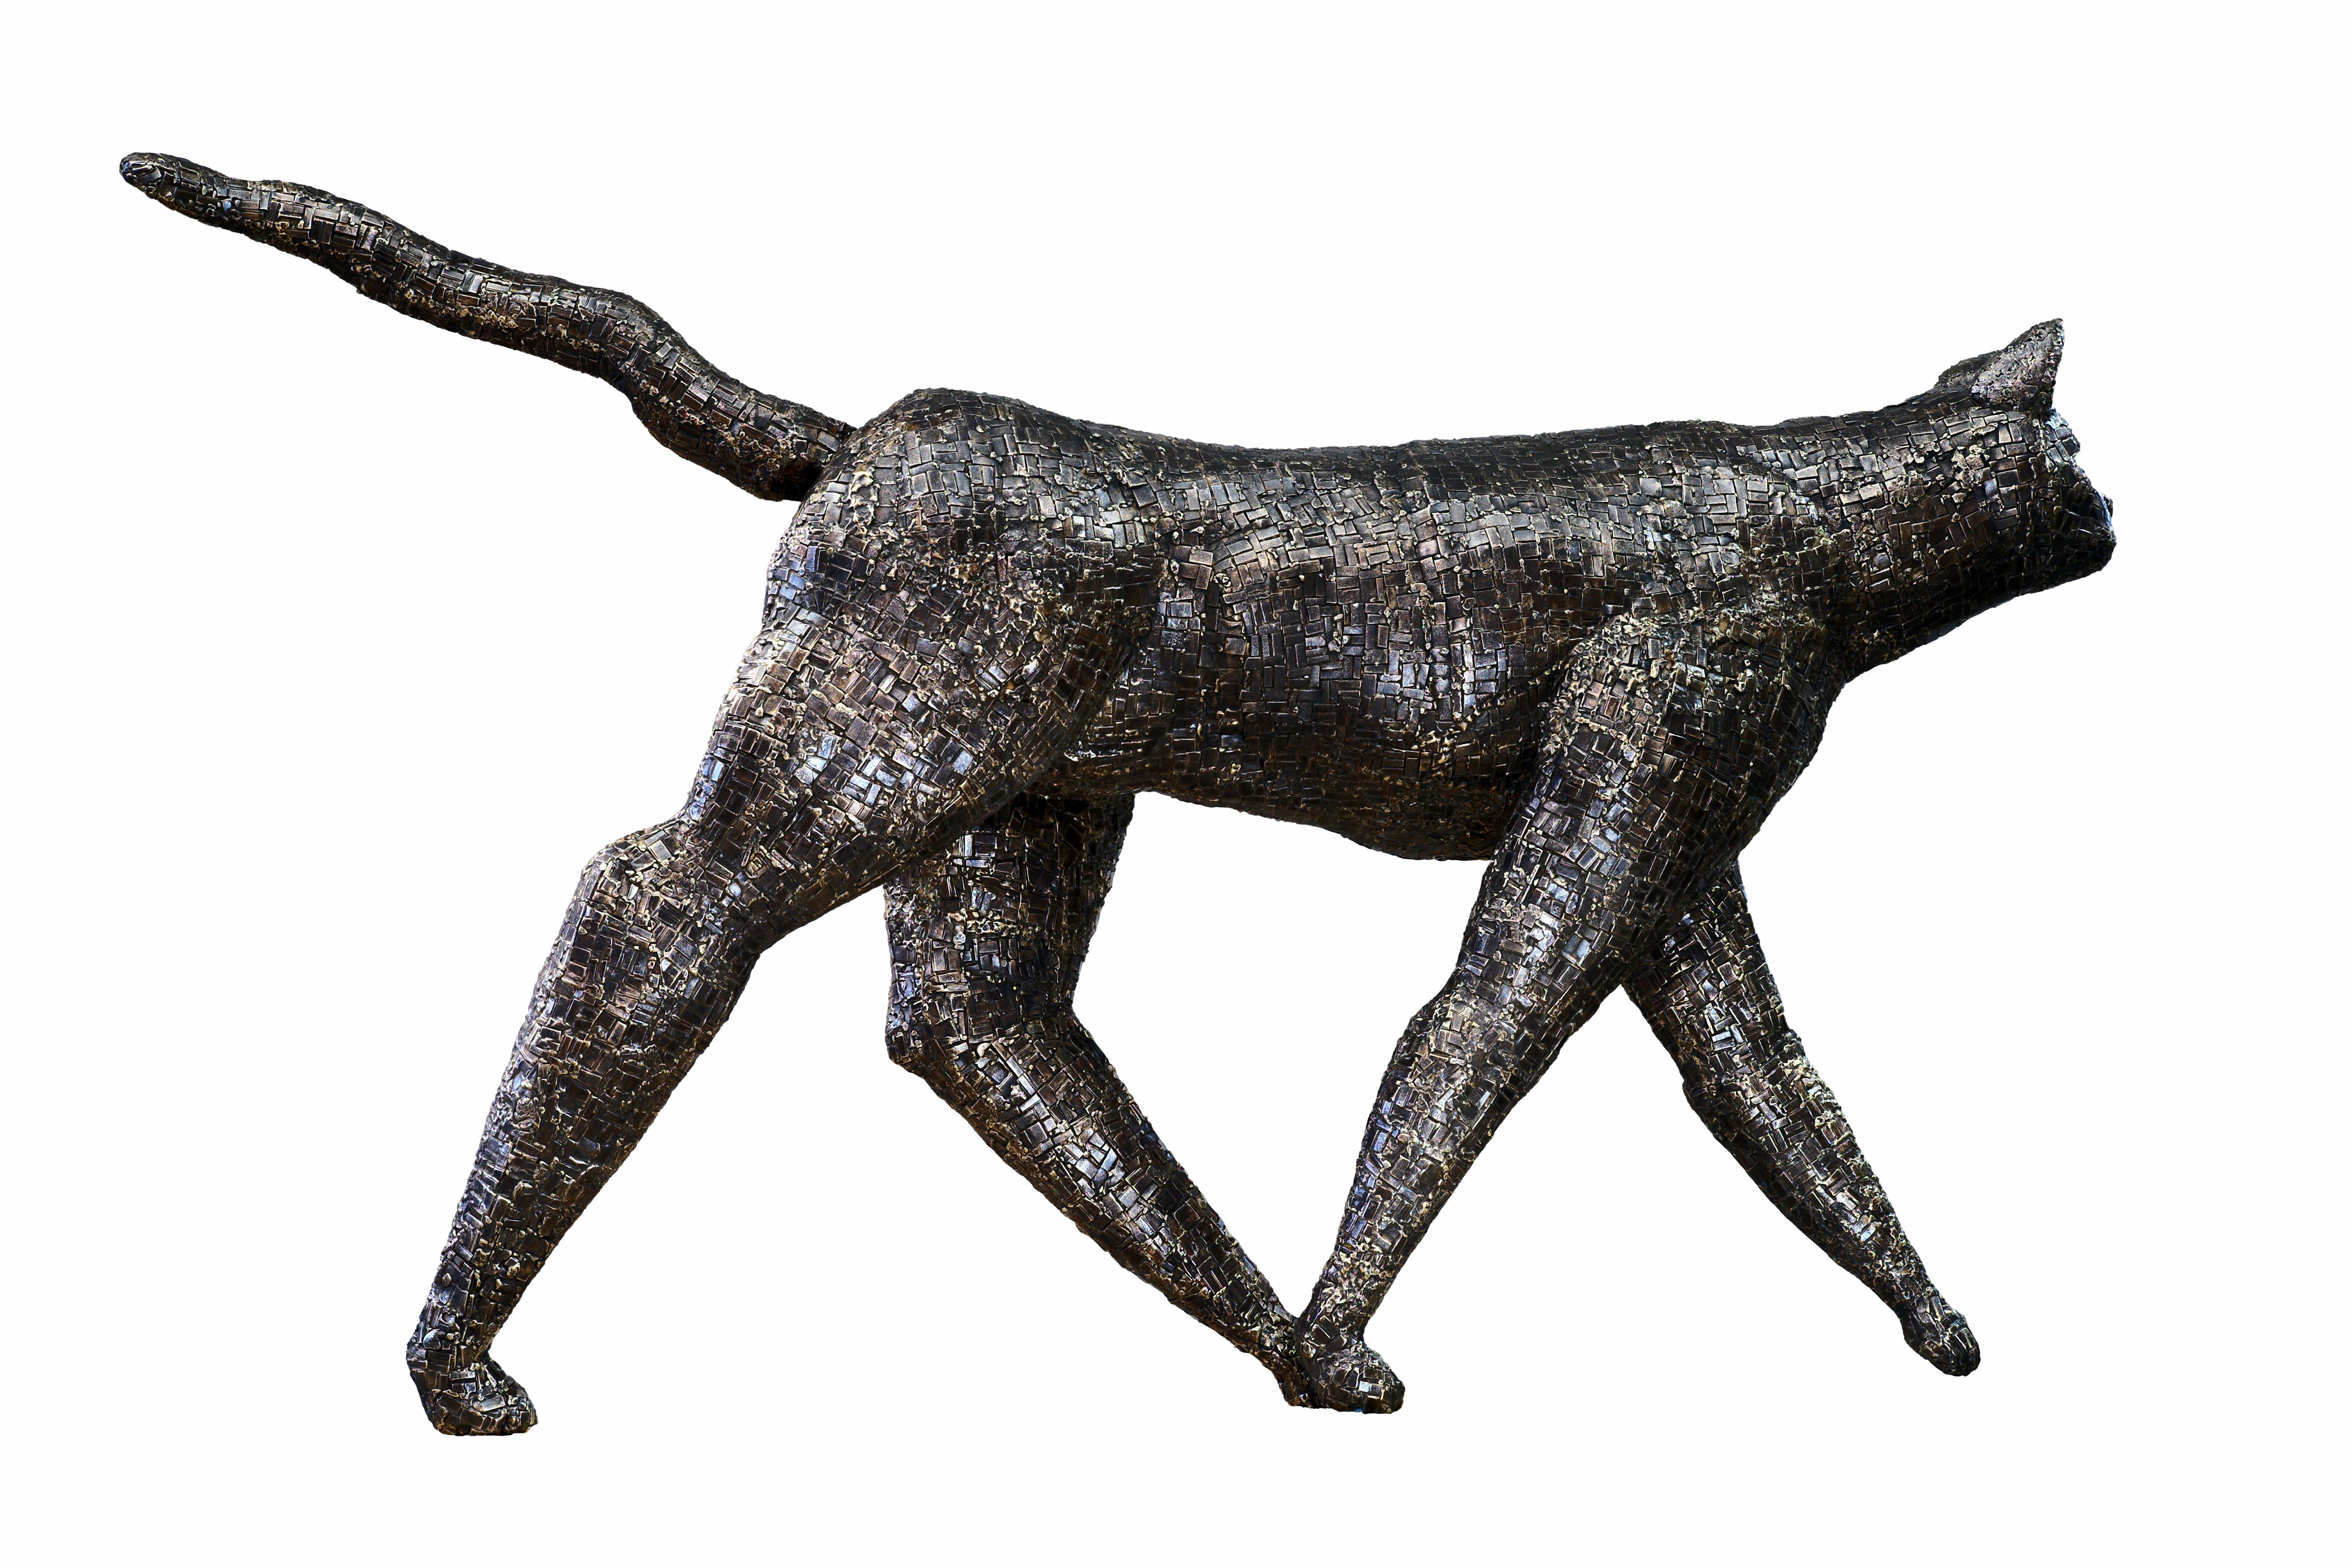 Walking Cat - Large Scale Bronze Animal Sculpture with Mosaic Patterned Surface - Gold Figurative Sculpture by Mary Block